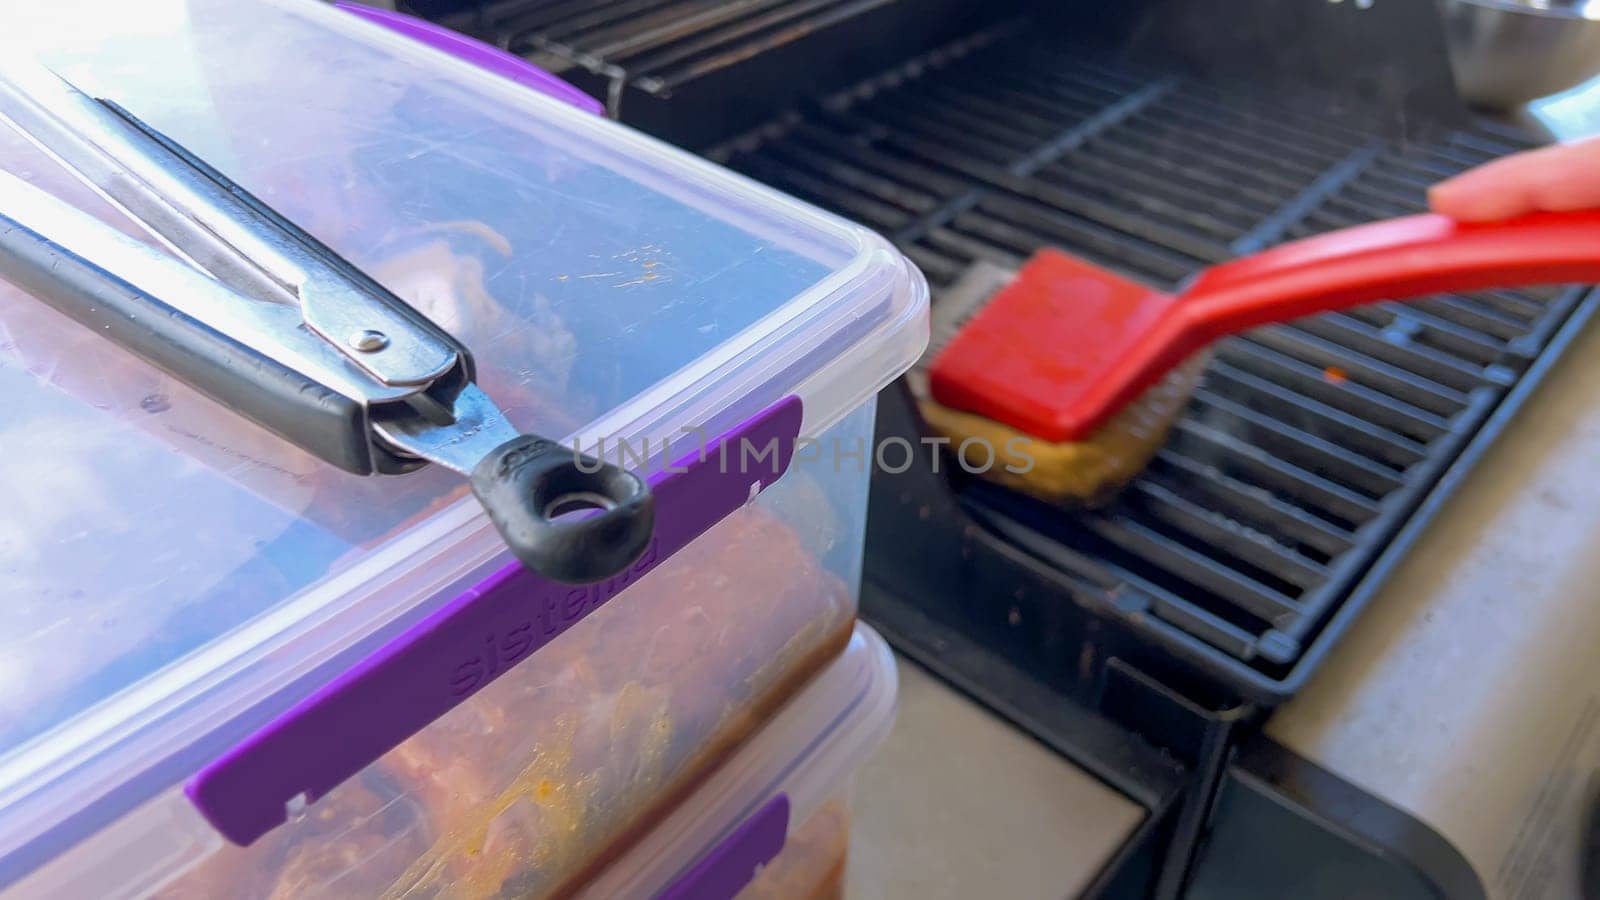 Cleaning a Barbecue Grill with a Brush After Cooking by arinahabich